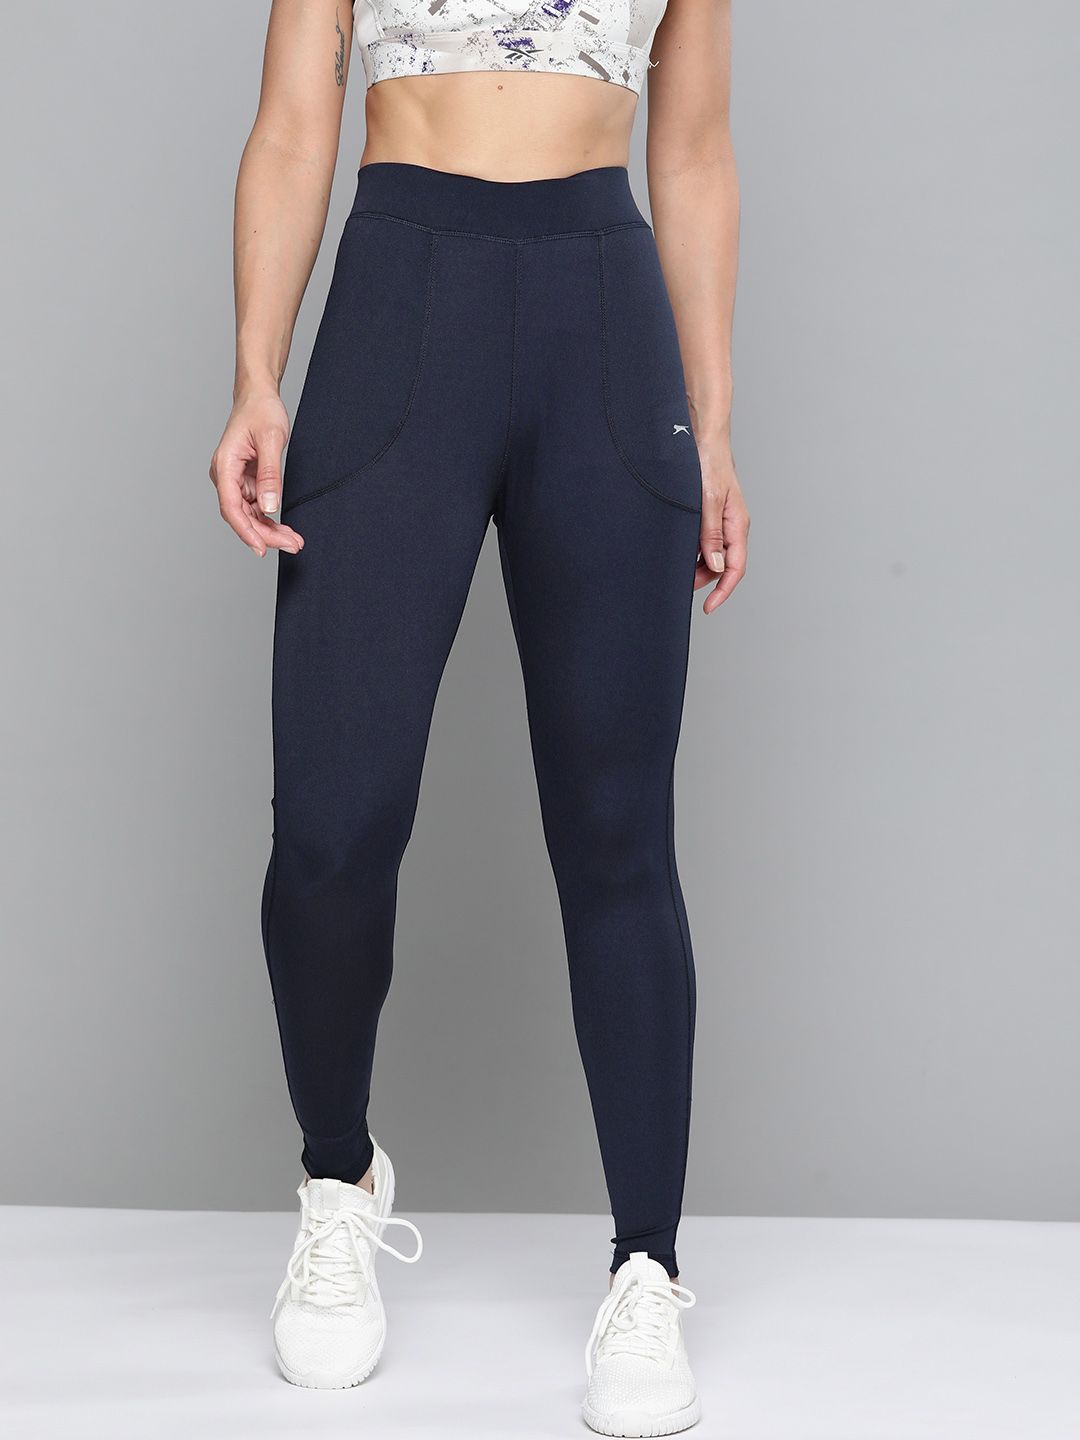 Slazenger Women Navy Blue Solid Net Rapid-Dry Sports Tights Price in India